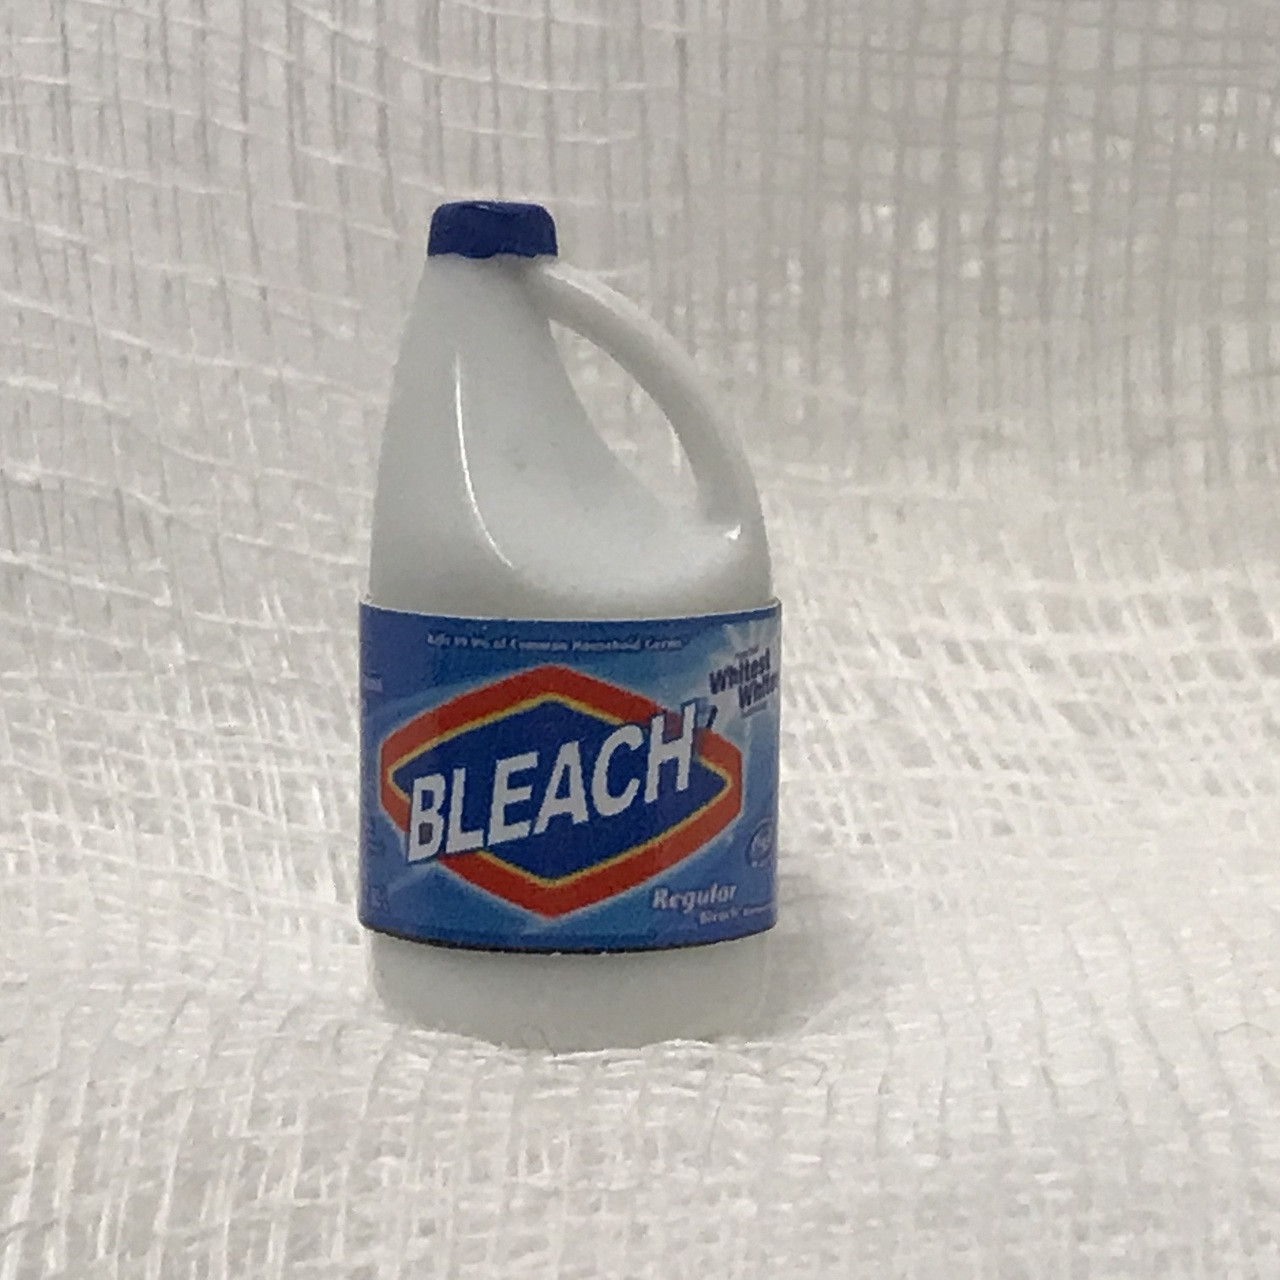 Bottle of Bleach Dollhouse Miniature Collectible 1:12 Scale 